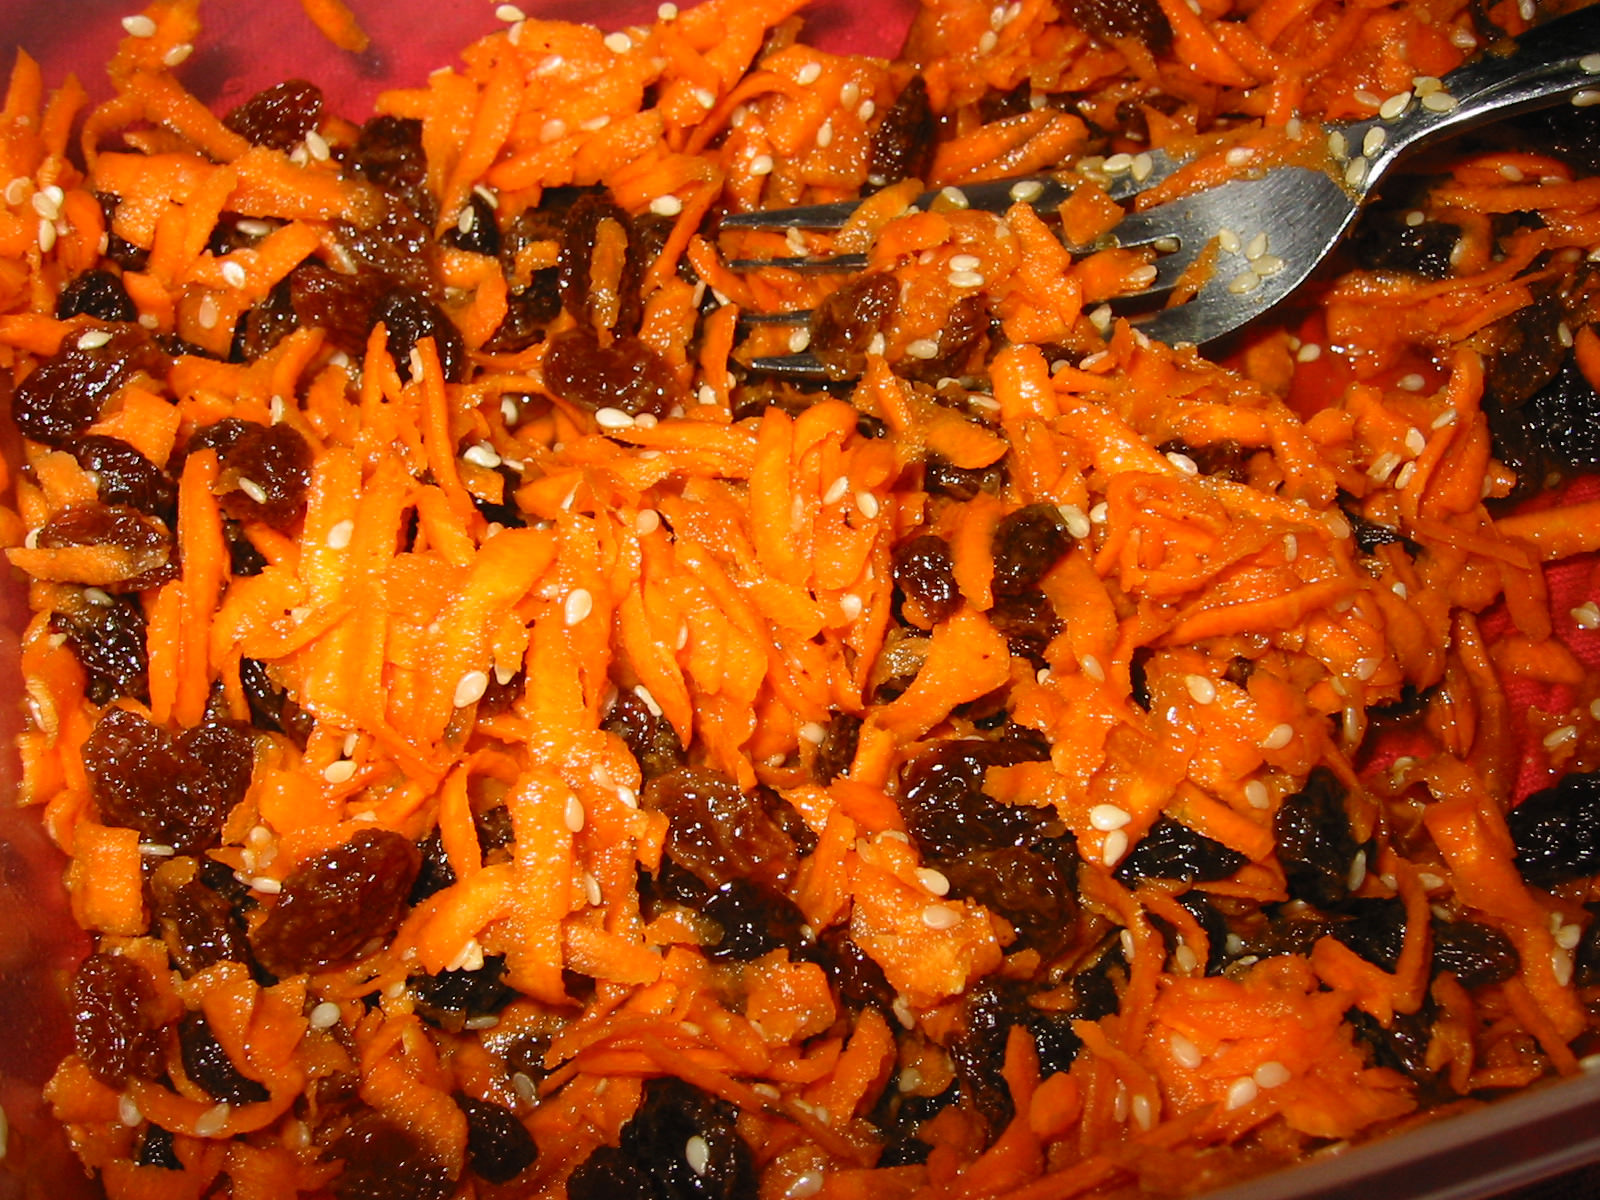 Carrot and sultana salad with sesame oil and honey dressing